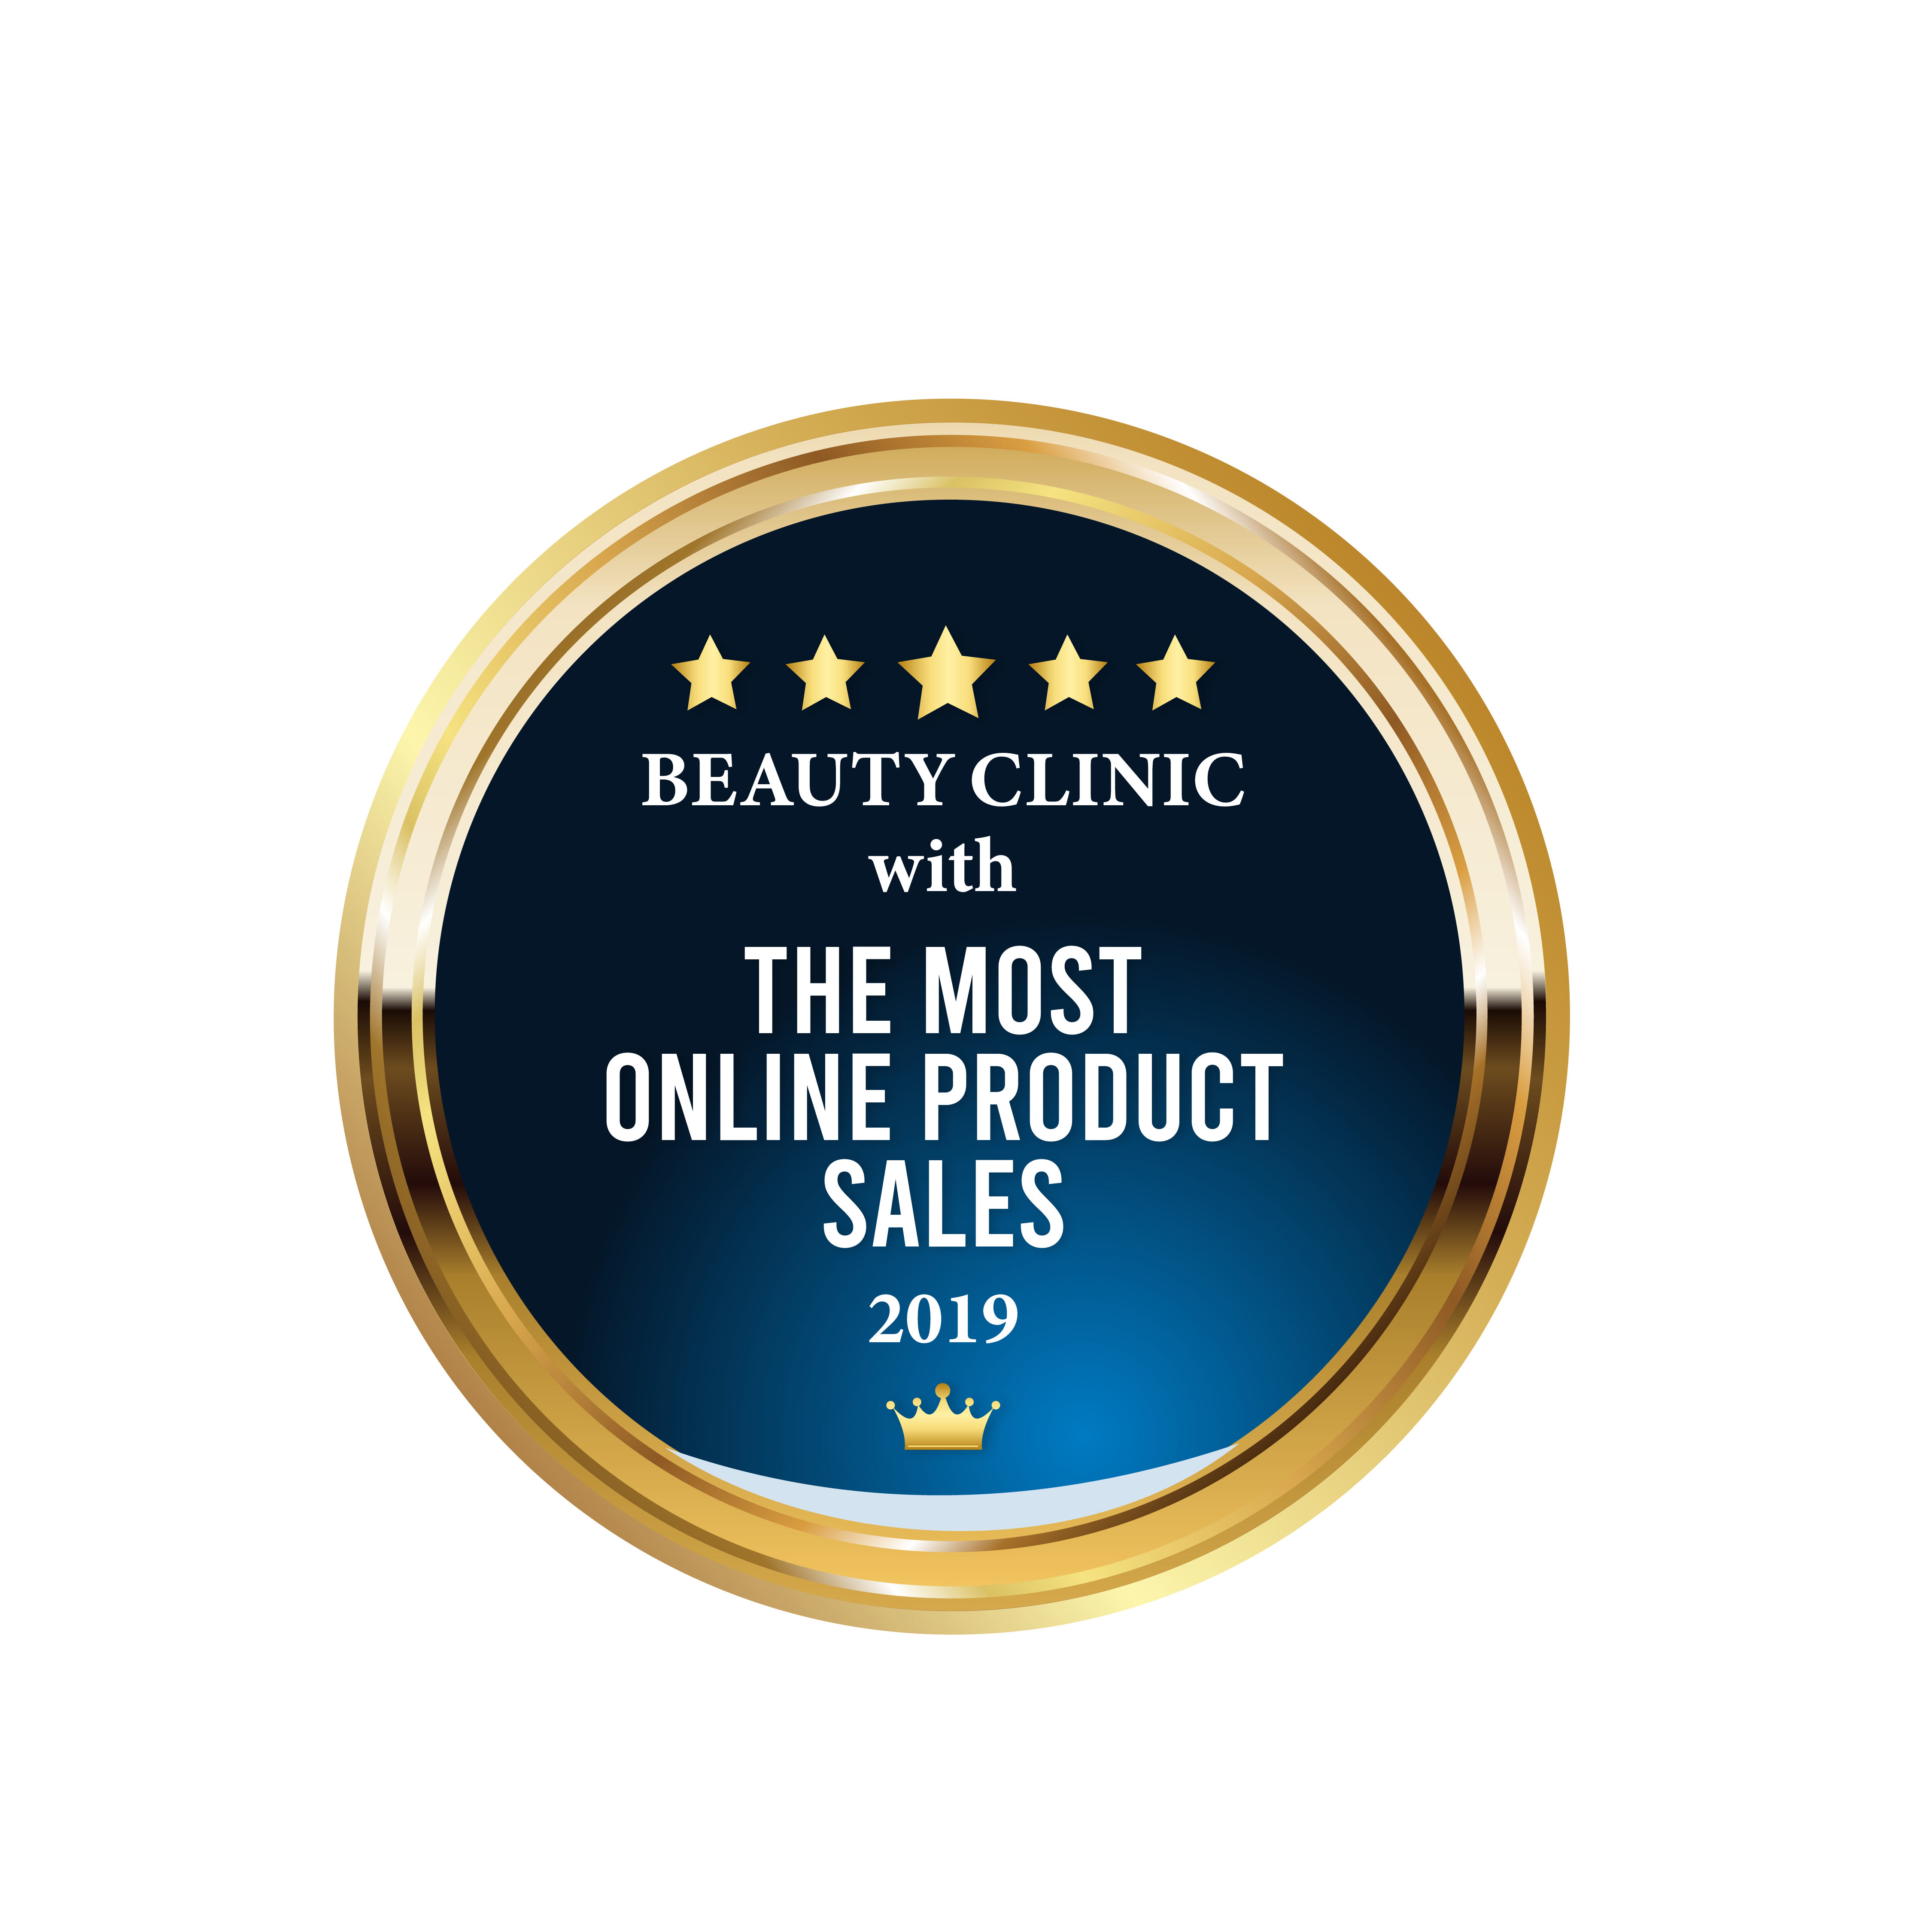 Copy of Beauty Clnic with The Most Online Product Sales 2019-06